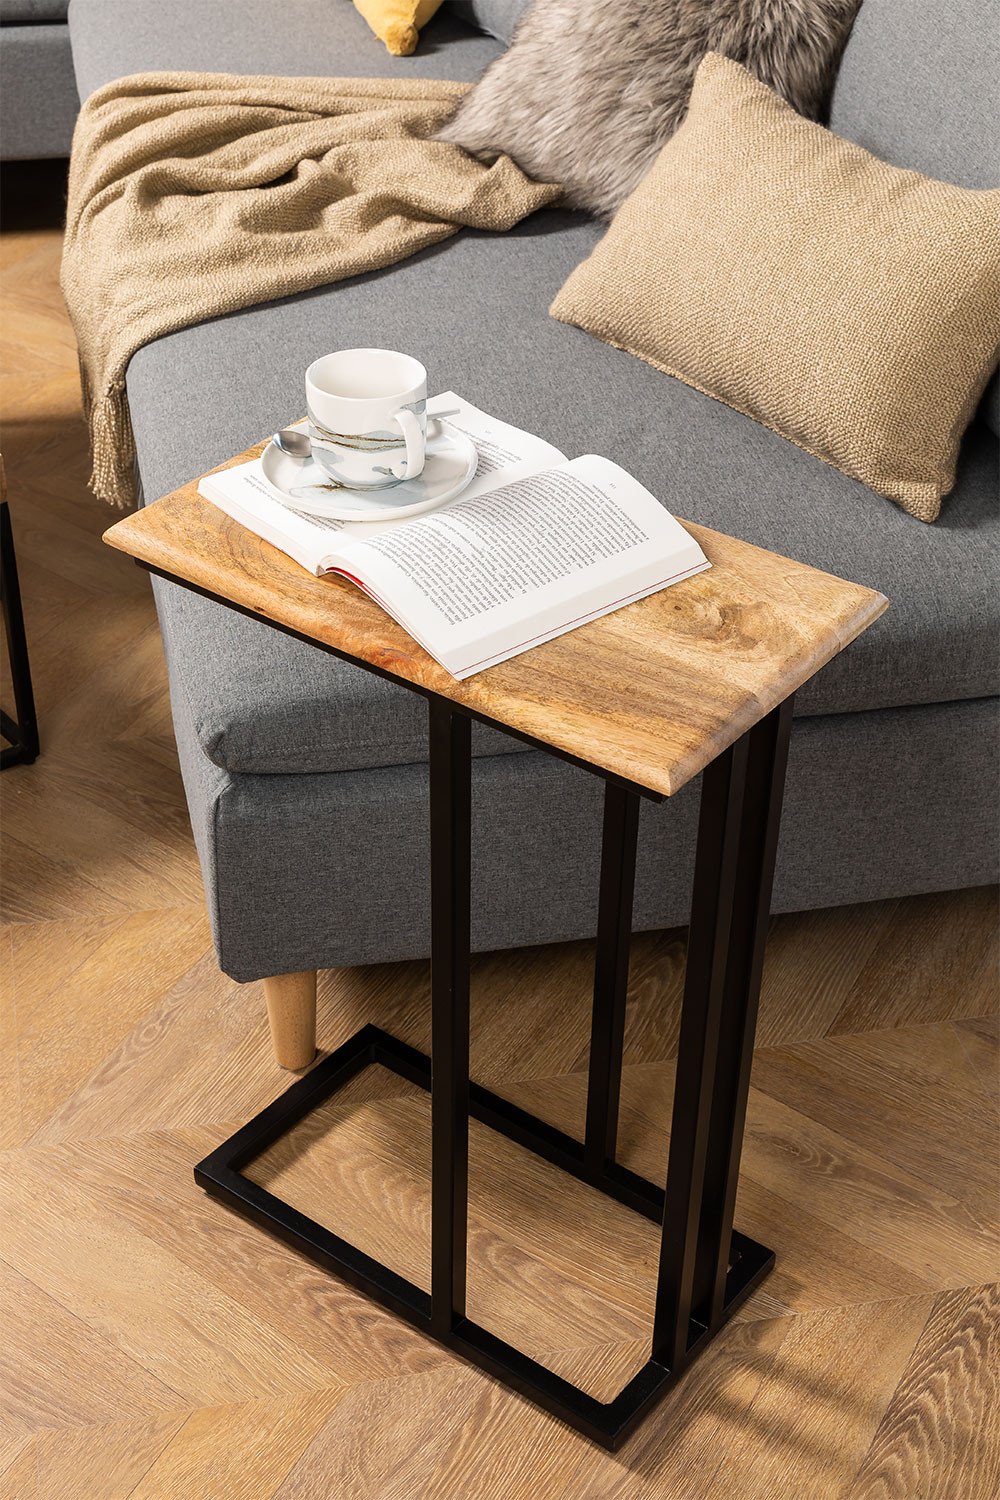 Bavi Mango Wood Side Table Sklum The heavyweight round mango wood side table features a central frame, which is detailed and looks really stylish and modern. bavi mango wood side table